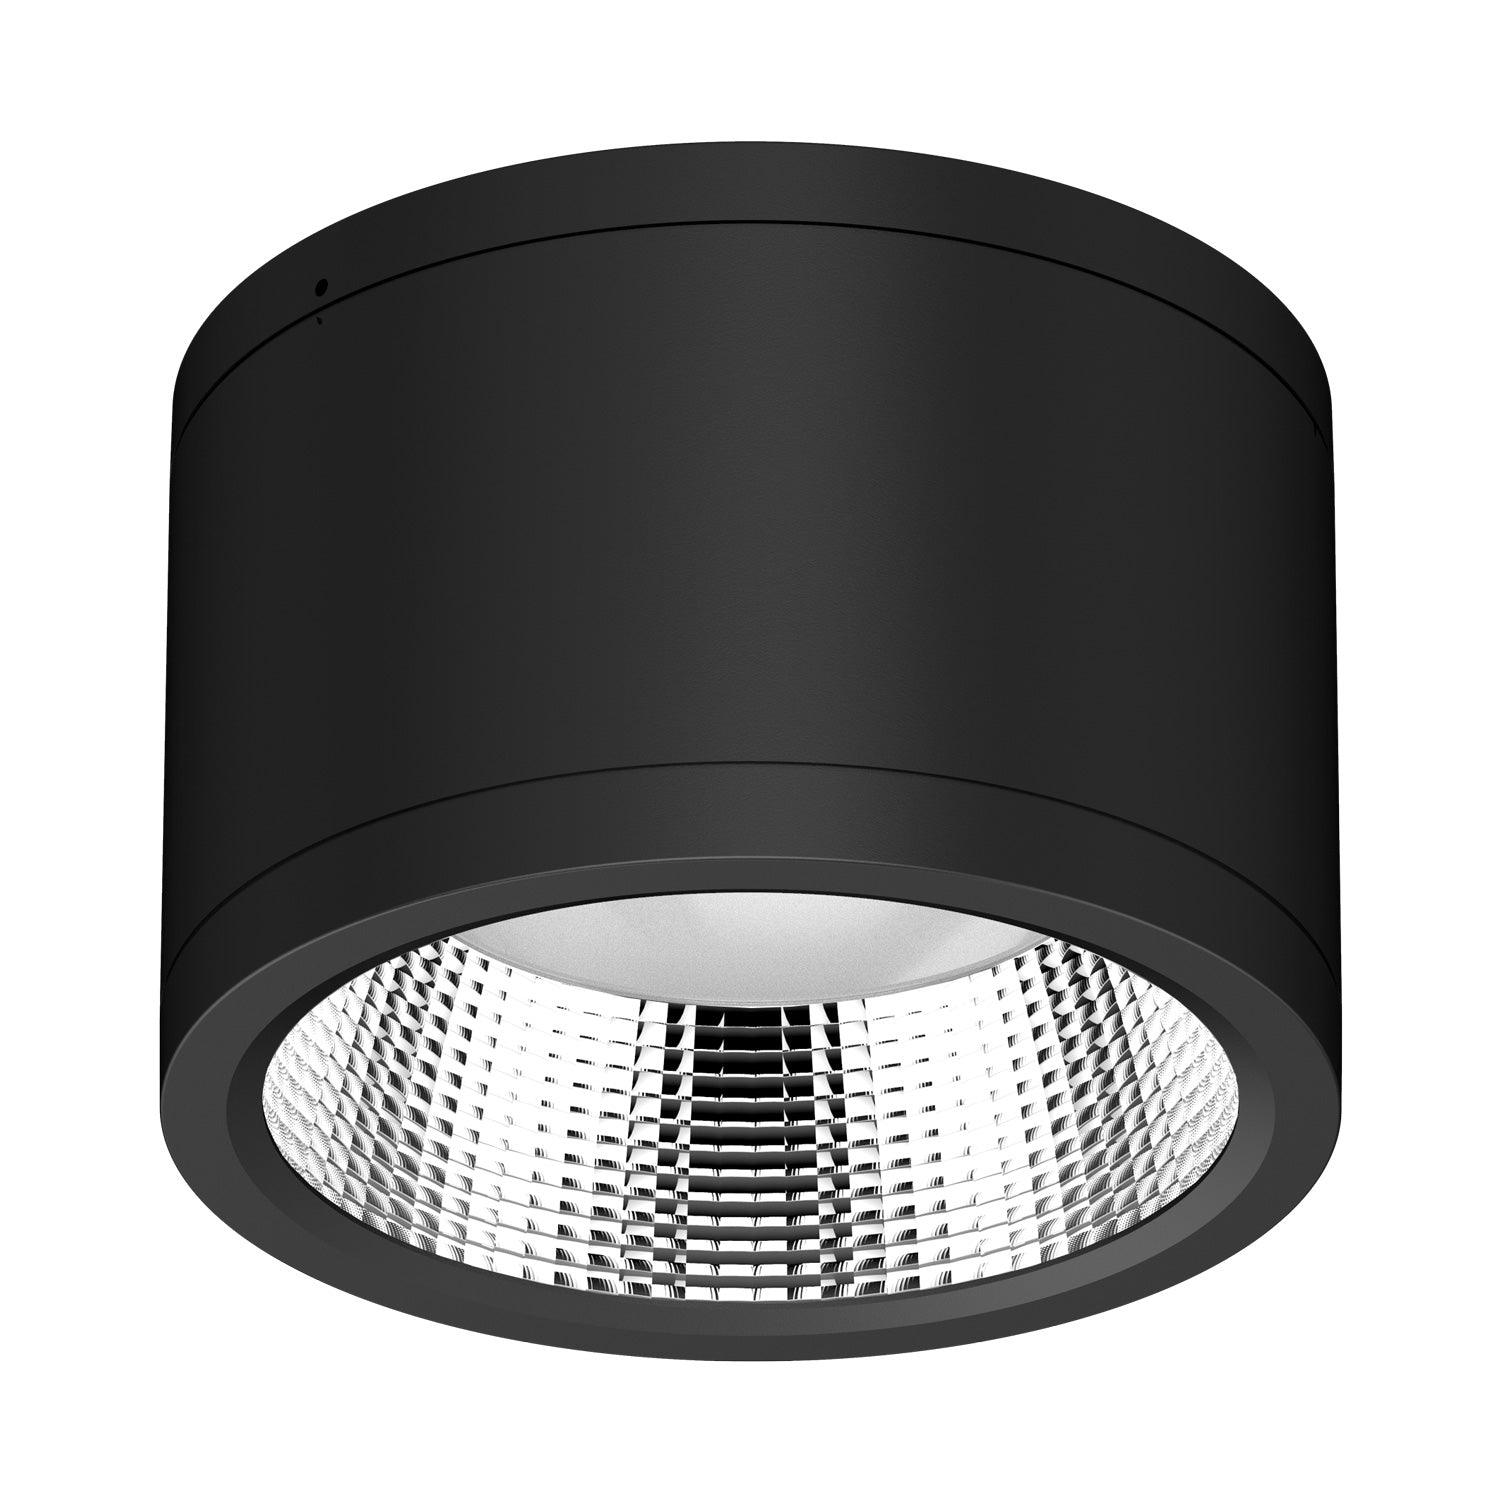 Domus Lighting LED Downlights 35W / BLACK Domus Neo-Pro Surface Mounted Downlight Lights-For-You 20894